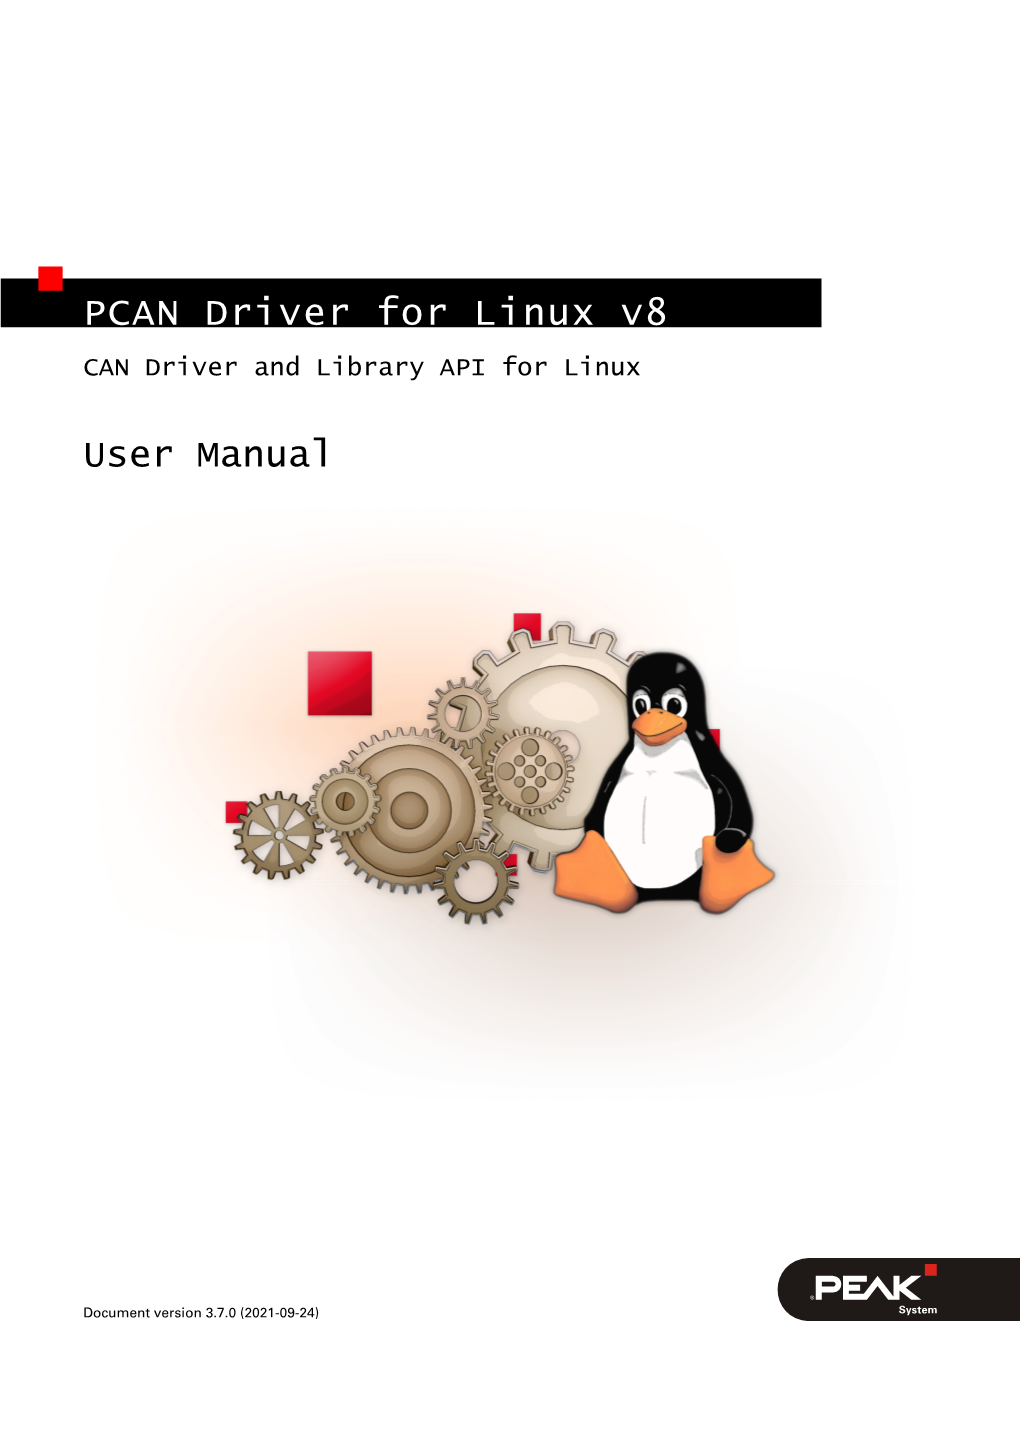 PCAN Driver for Linux V8 CAN Driver and Library API for Linux